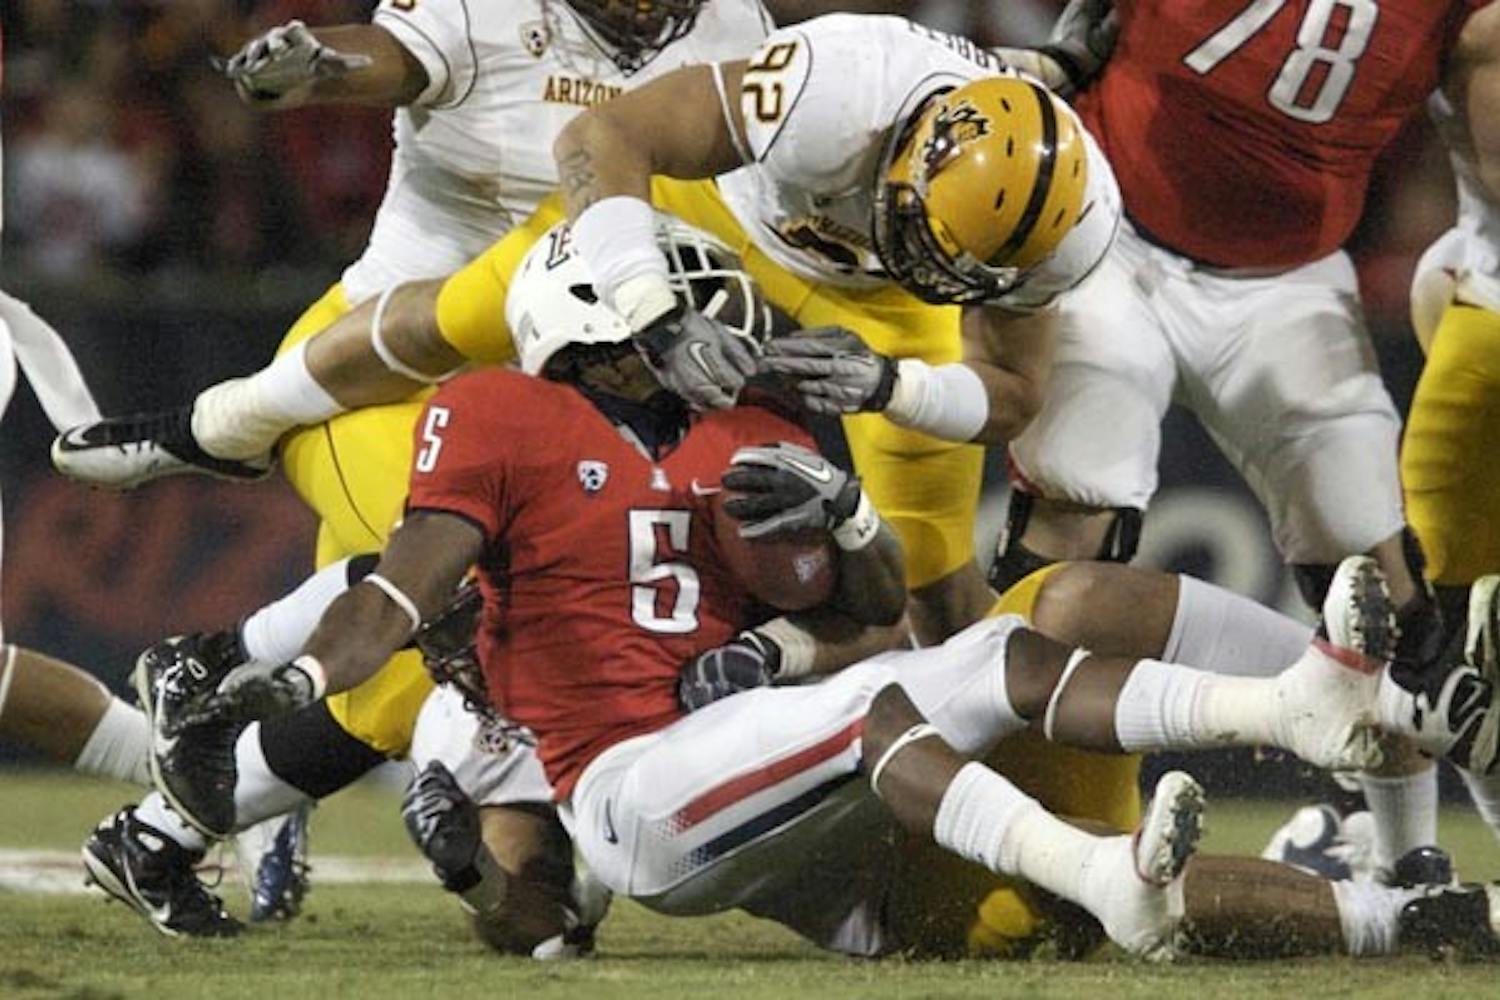 DOWN AND OUT: Junior defensive end Jamaar Jarrett tackles UA senior running back Nic Grigsby during last week's Territorial Cup game. The game, an ASU win, marked the end of ASU's 2010 season, one that the team hopes will be a stepping stone to a successful 2011 campaign. (Photo by Scott Stuk)